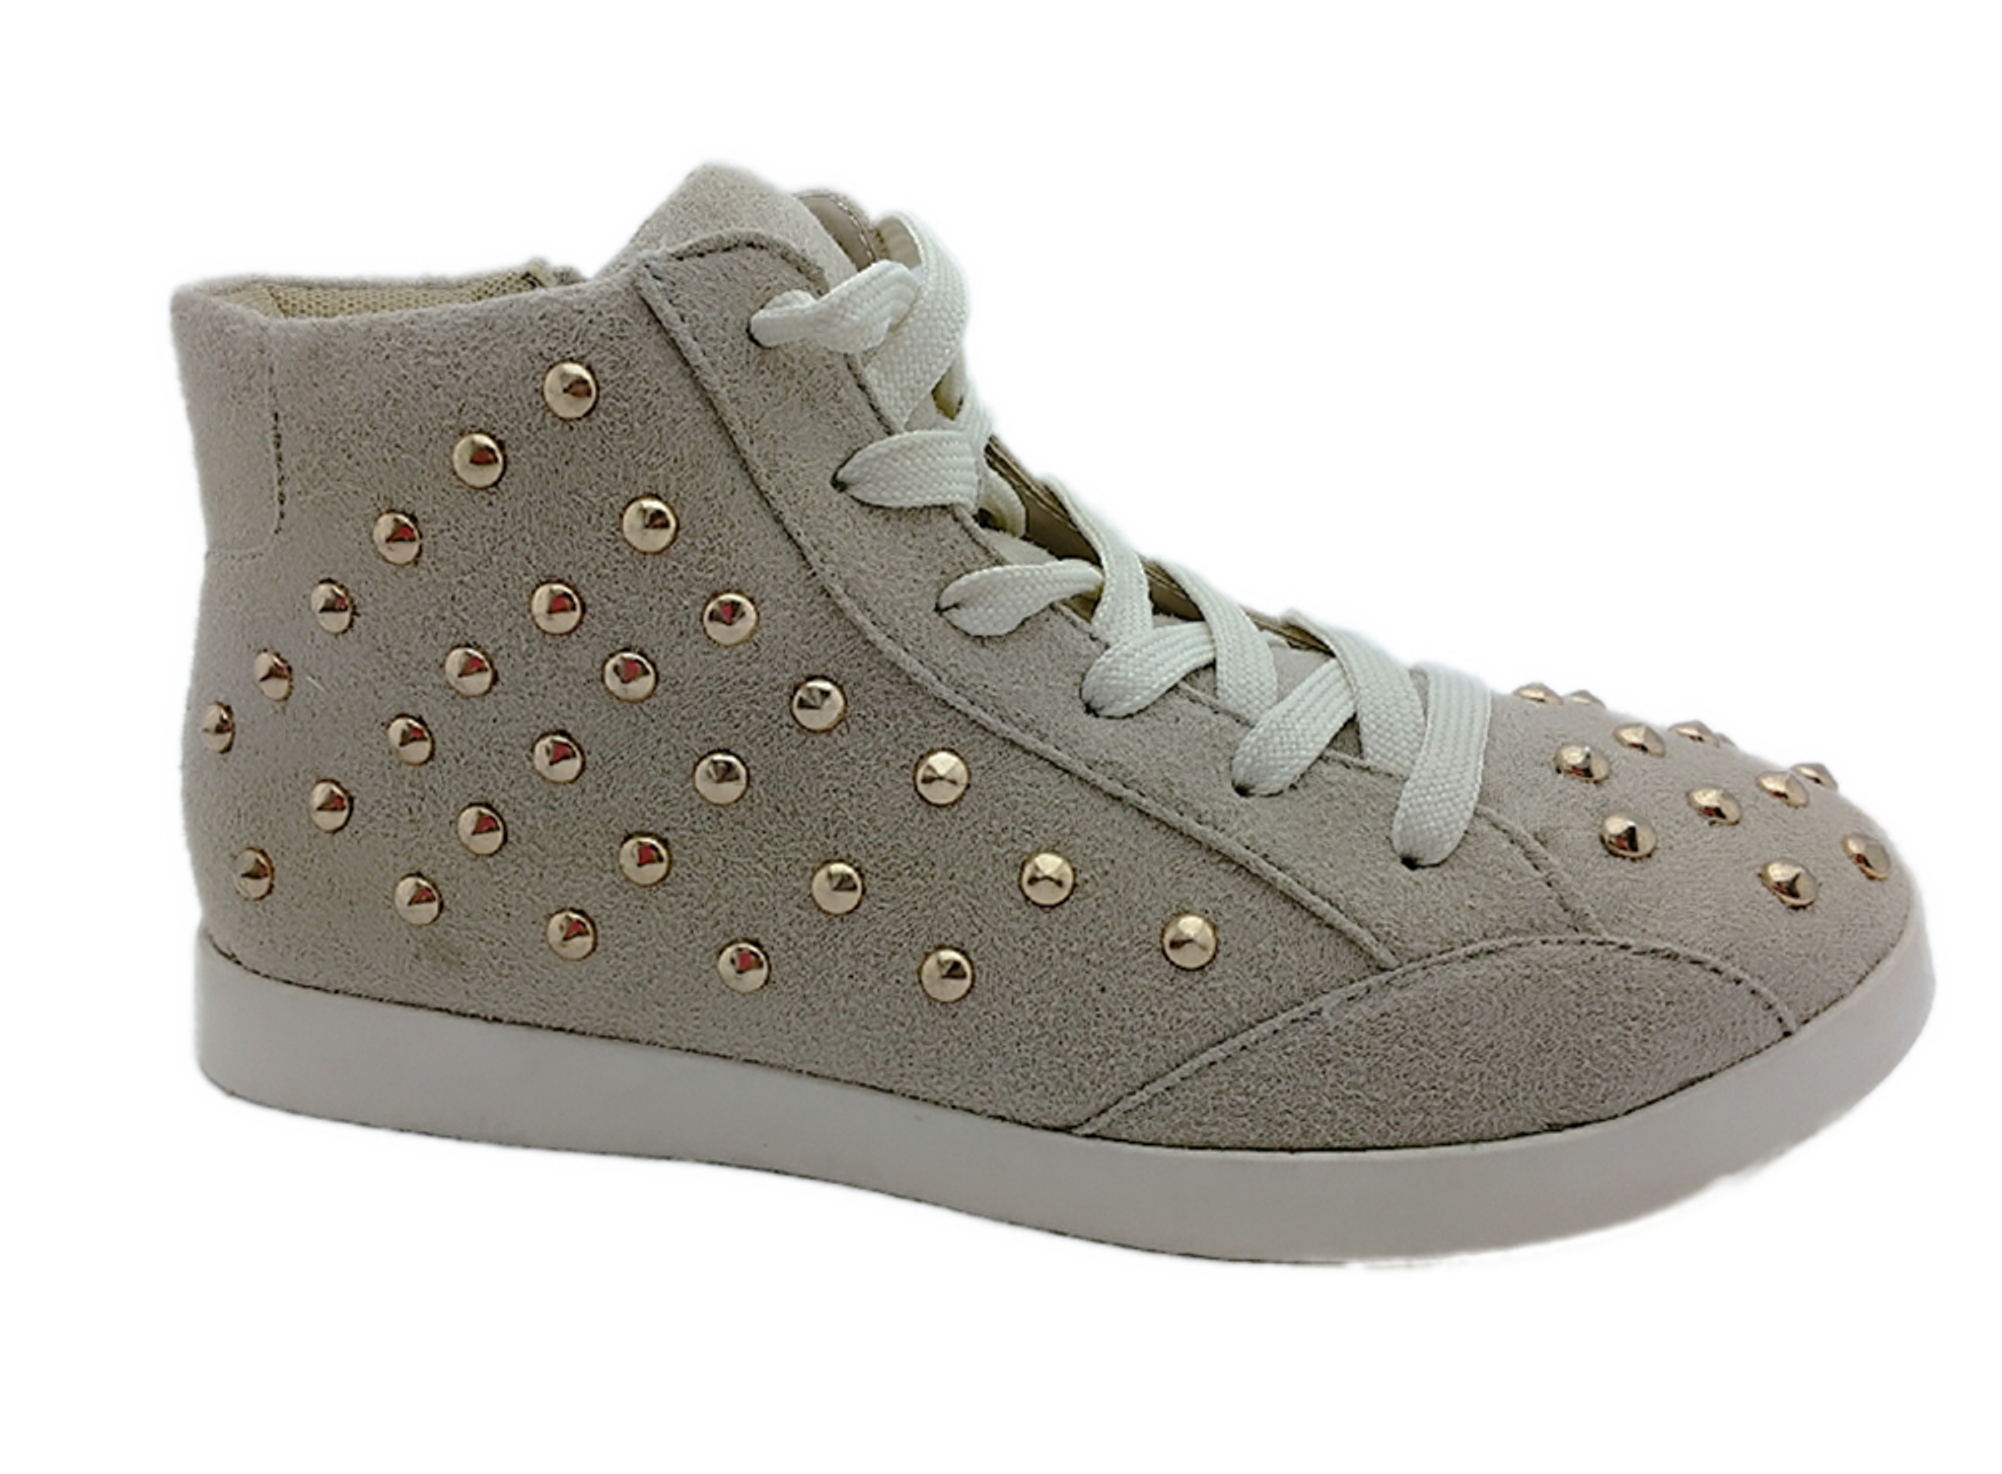 Women's Adora Taupe Suede Fashion Sneakers